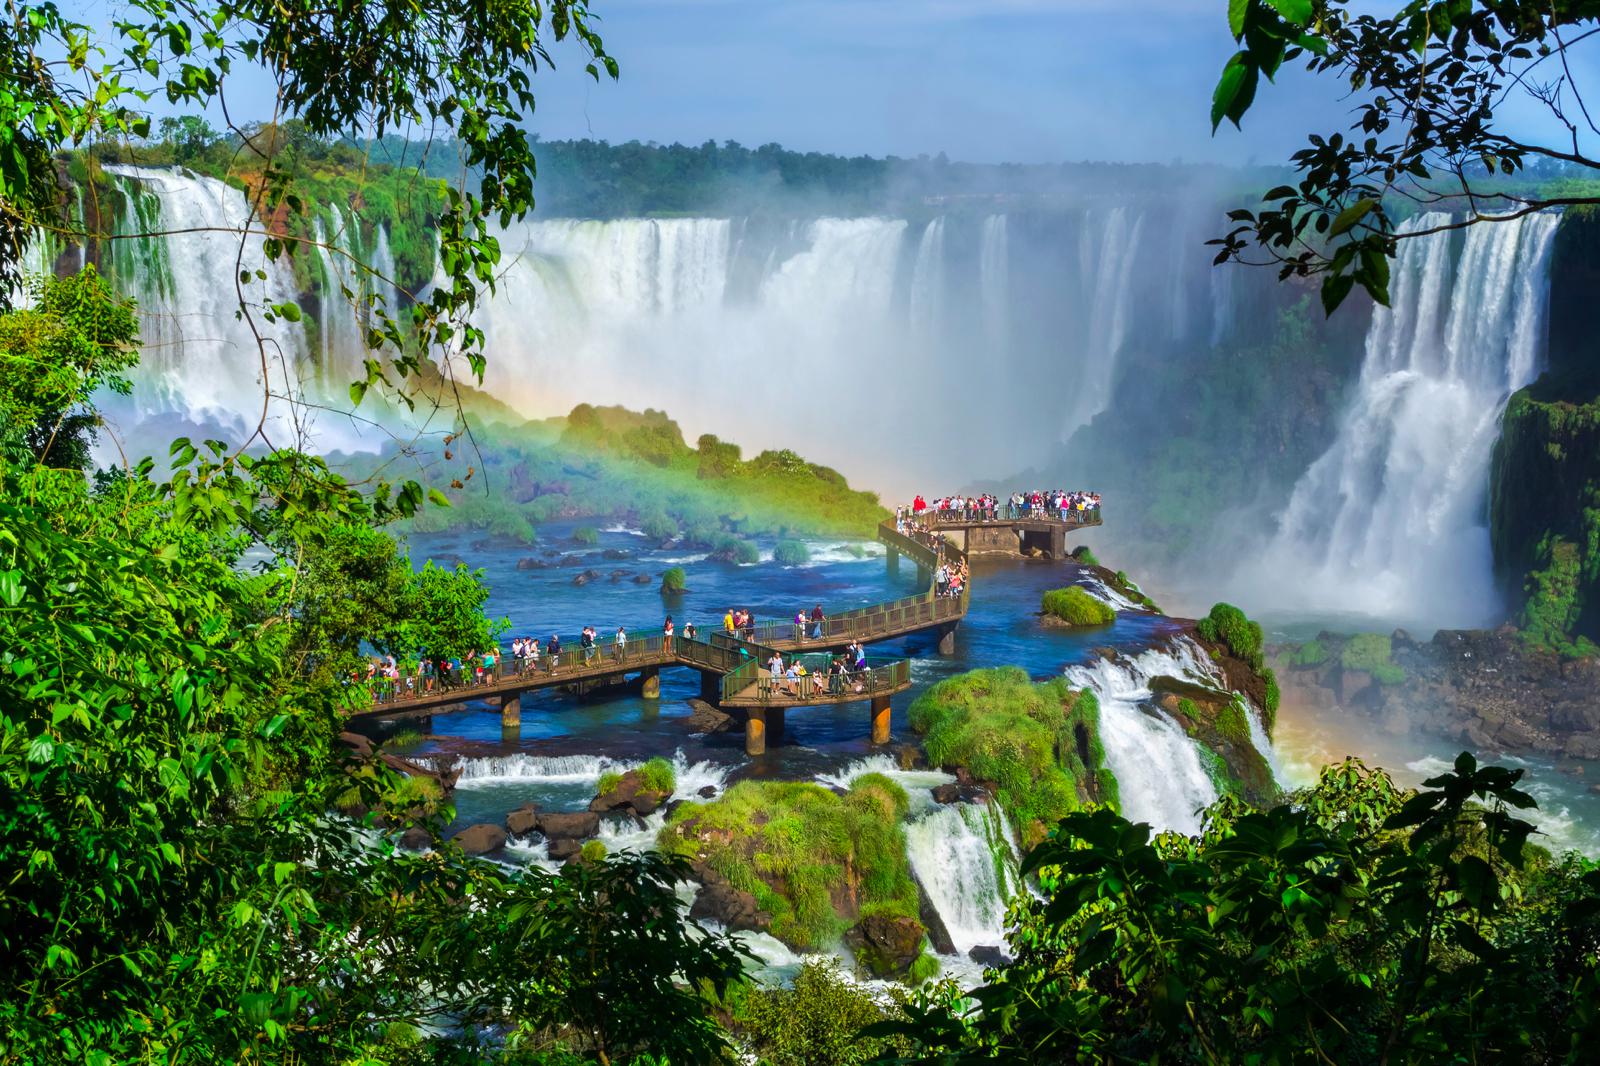 Iguazu Falls, one of the world's great natural wonders, on the border of Brazil and Argentina.